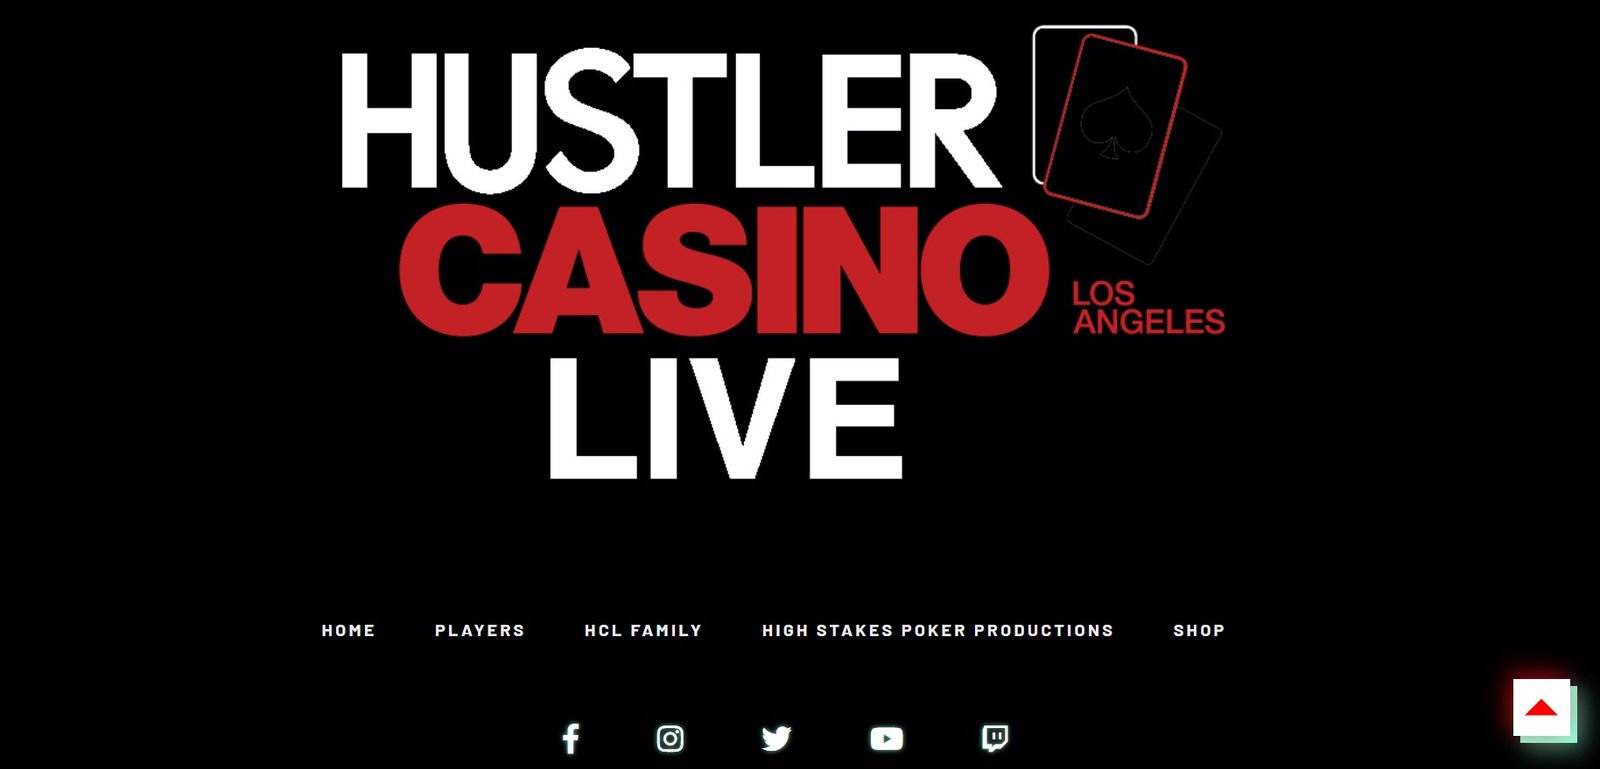 Hustler Casino Live Scandal: Was It A Hero Call Or A Ring Of Cheating?